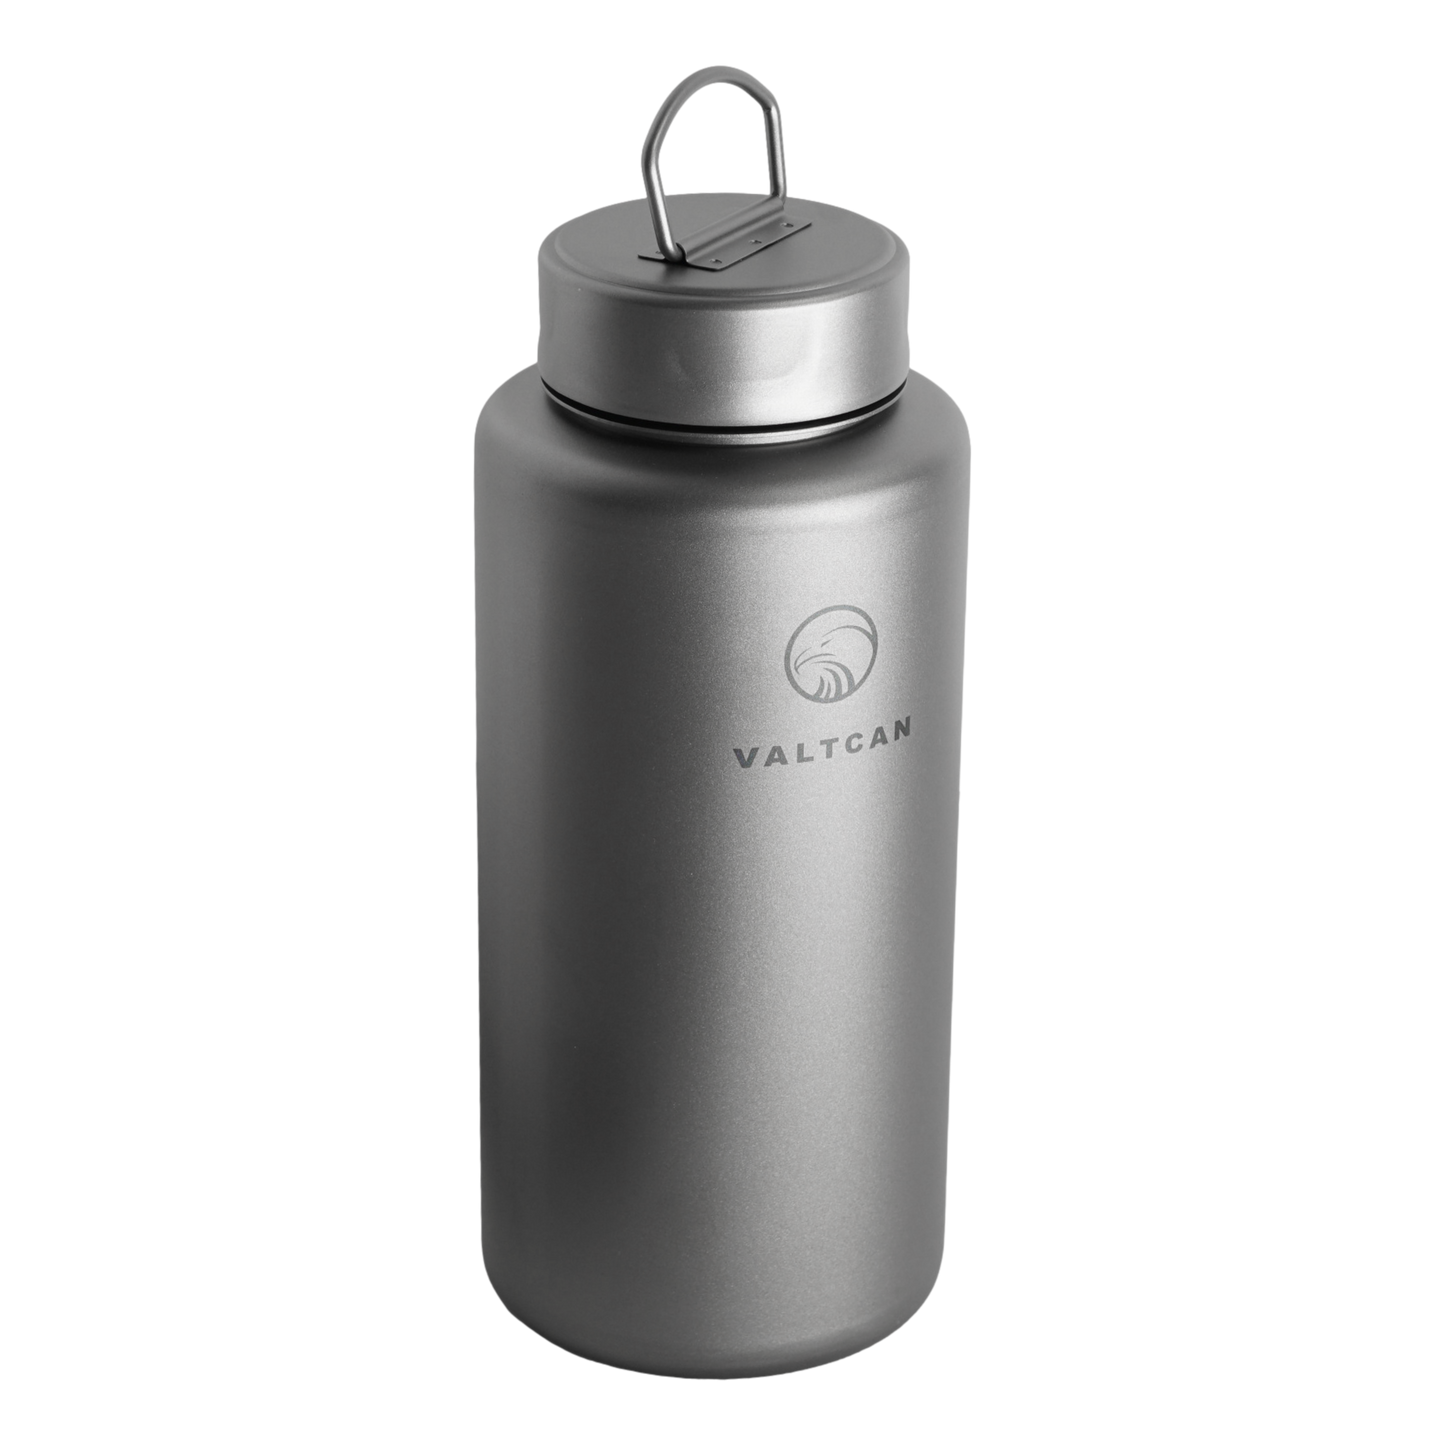 Valtcan 1000ml Titanium Water Bottle Wide Mouth Single Wall 34oz capacity 219 grams Ultralight